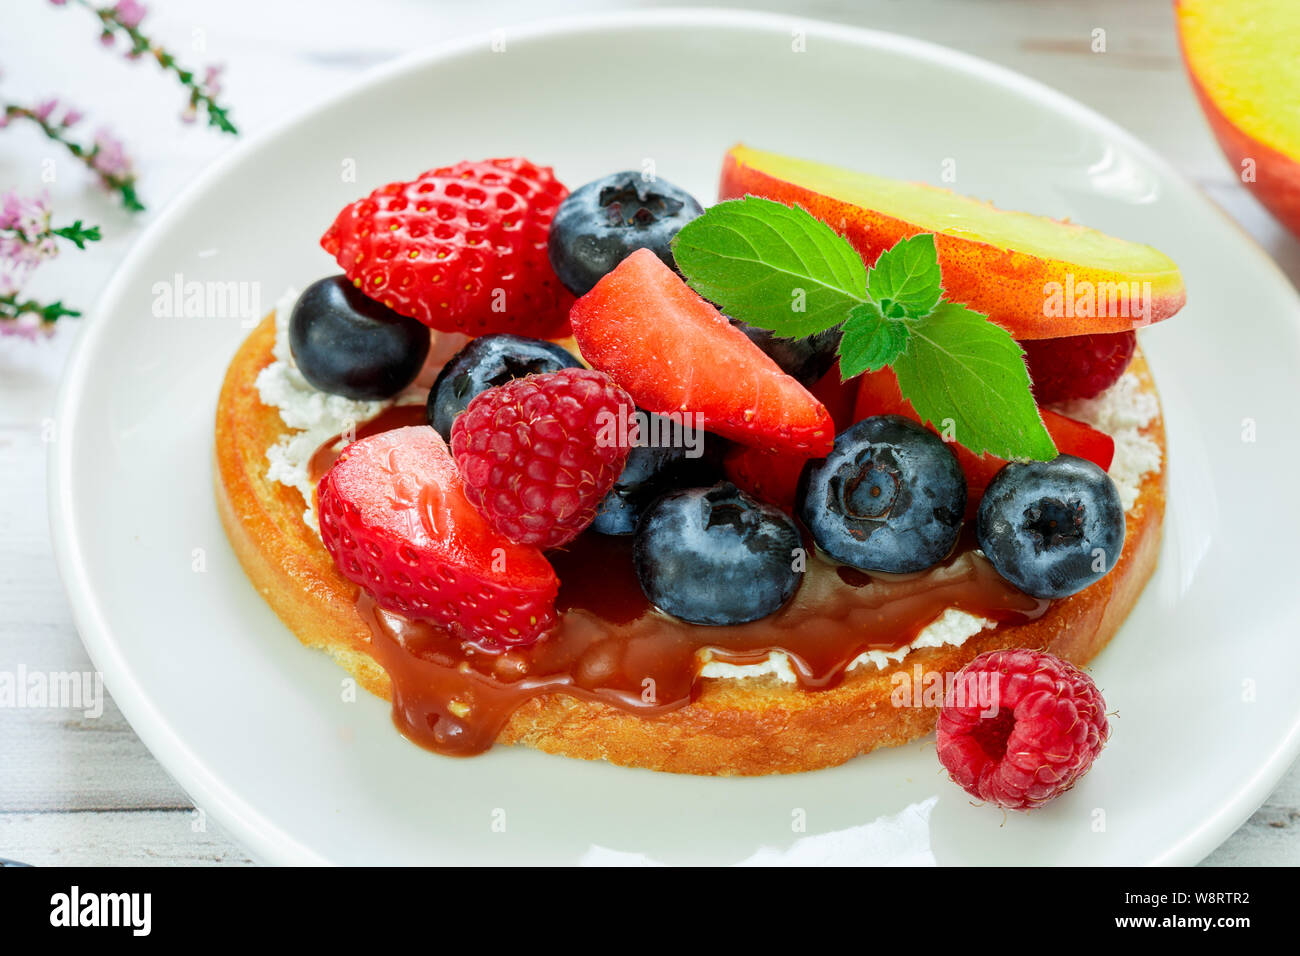 Delicious breakfast. Delicacy sandwich Toasts with cream cheese or mascarpone, caramel (iris toffee) and fresh berries - blueberries, raspberries, str Stock Photo